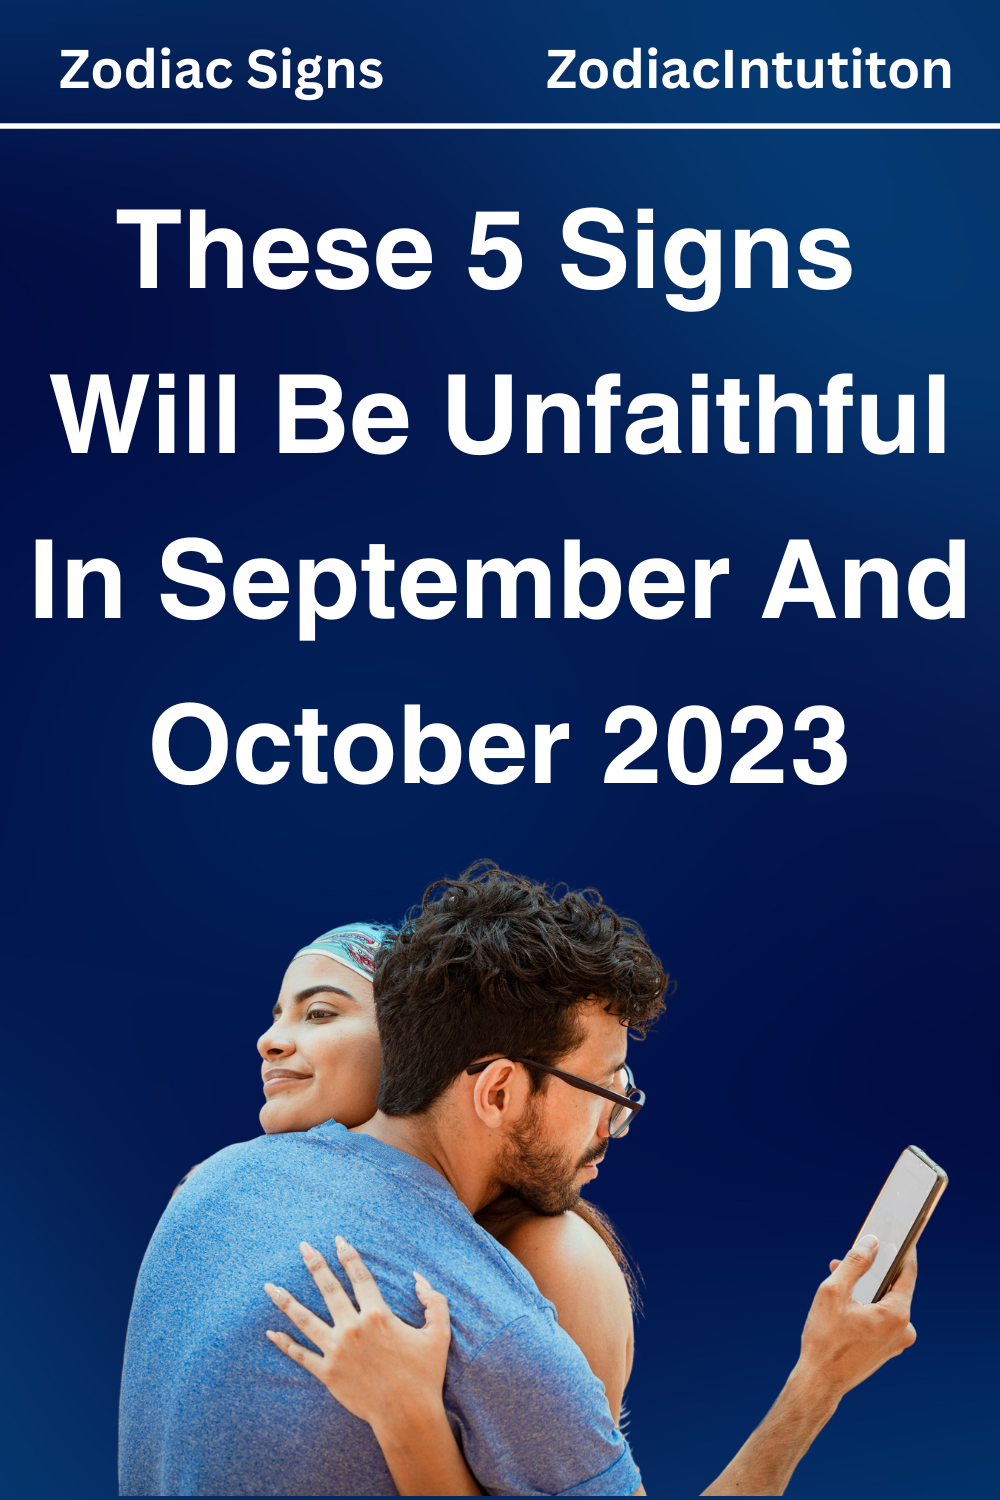 These 5 Signs Will Be Unfaithful In September And October 2023